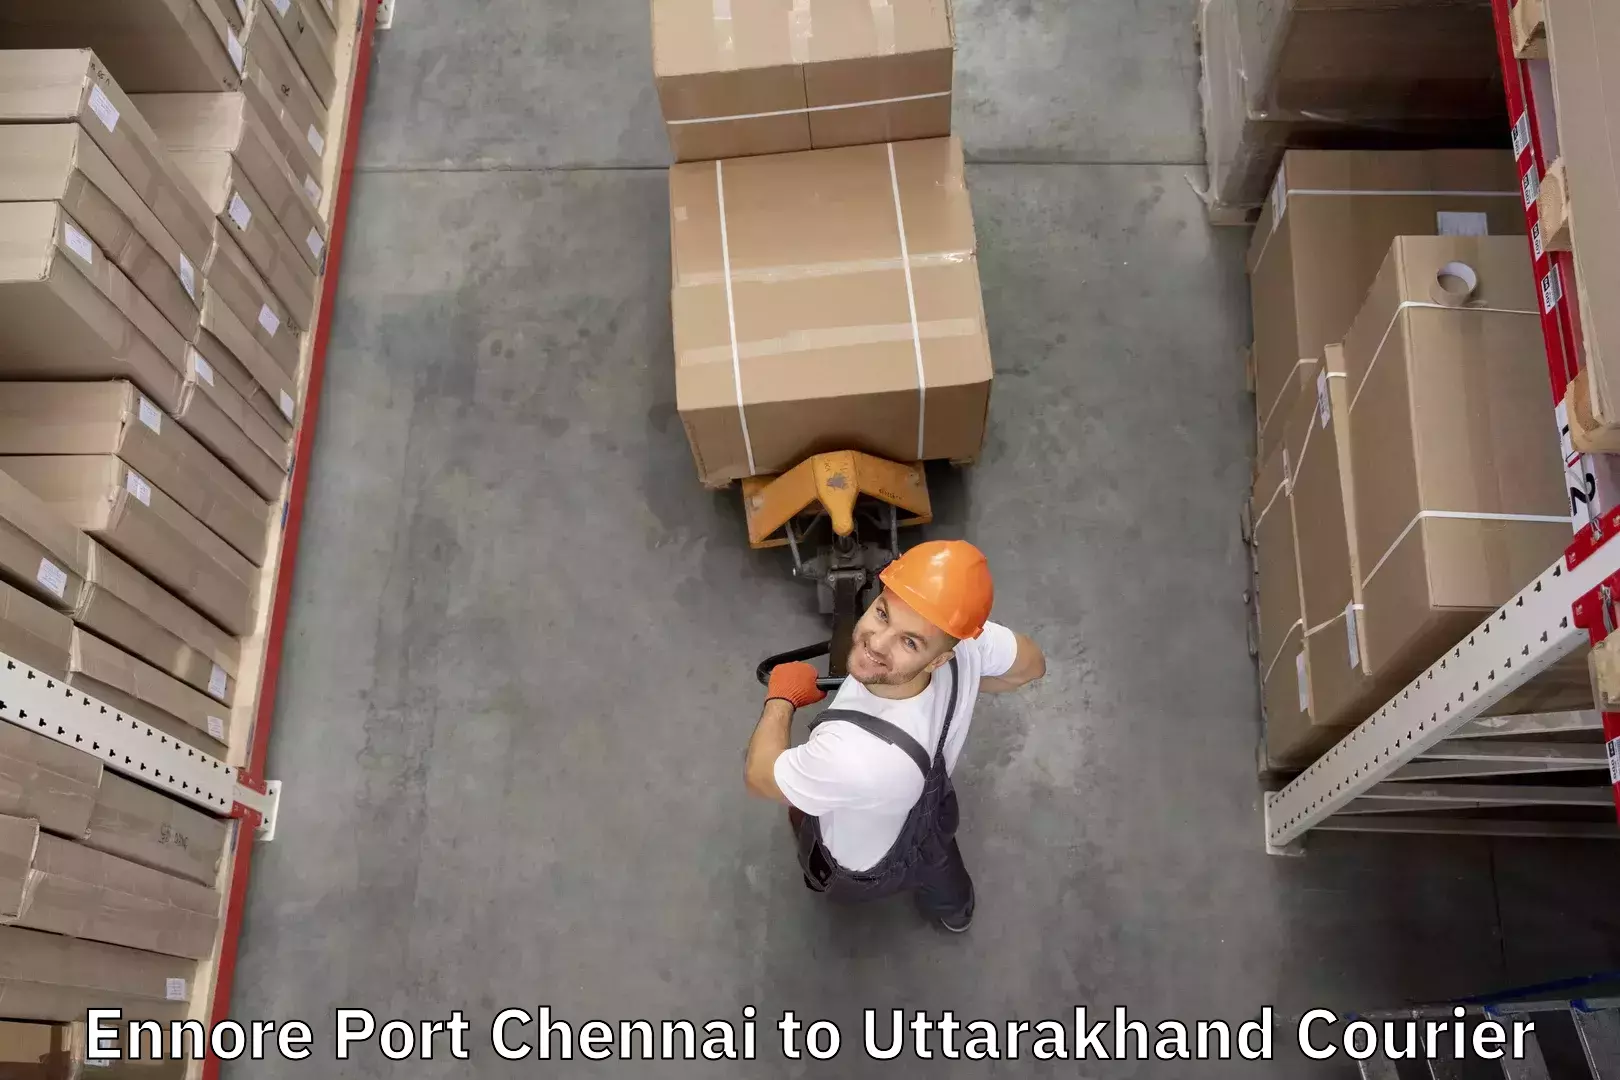 Instant baggage transport quote Ennore Port Chennai to Roorkee